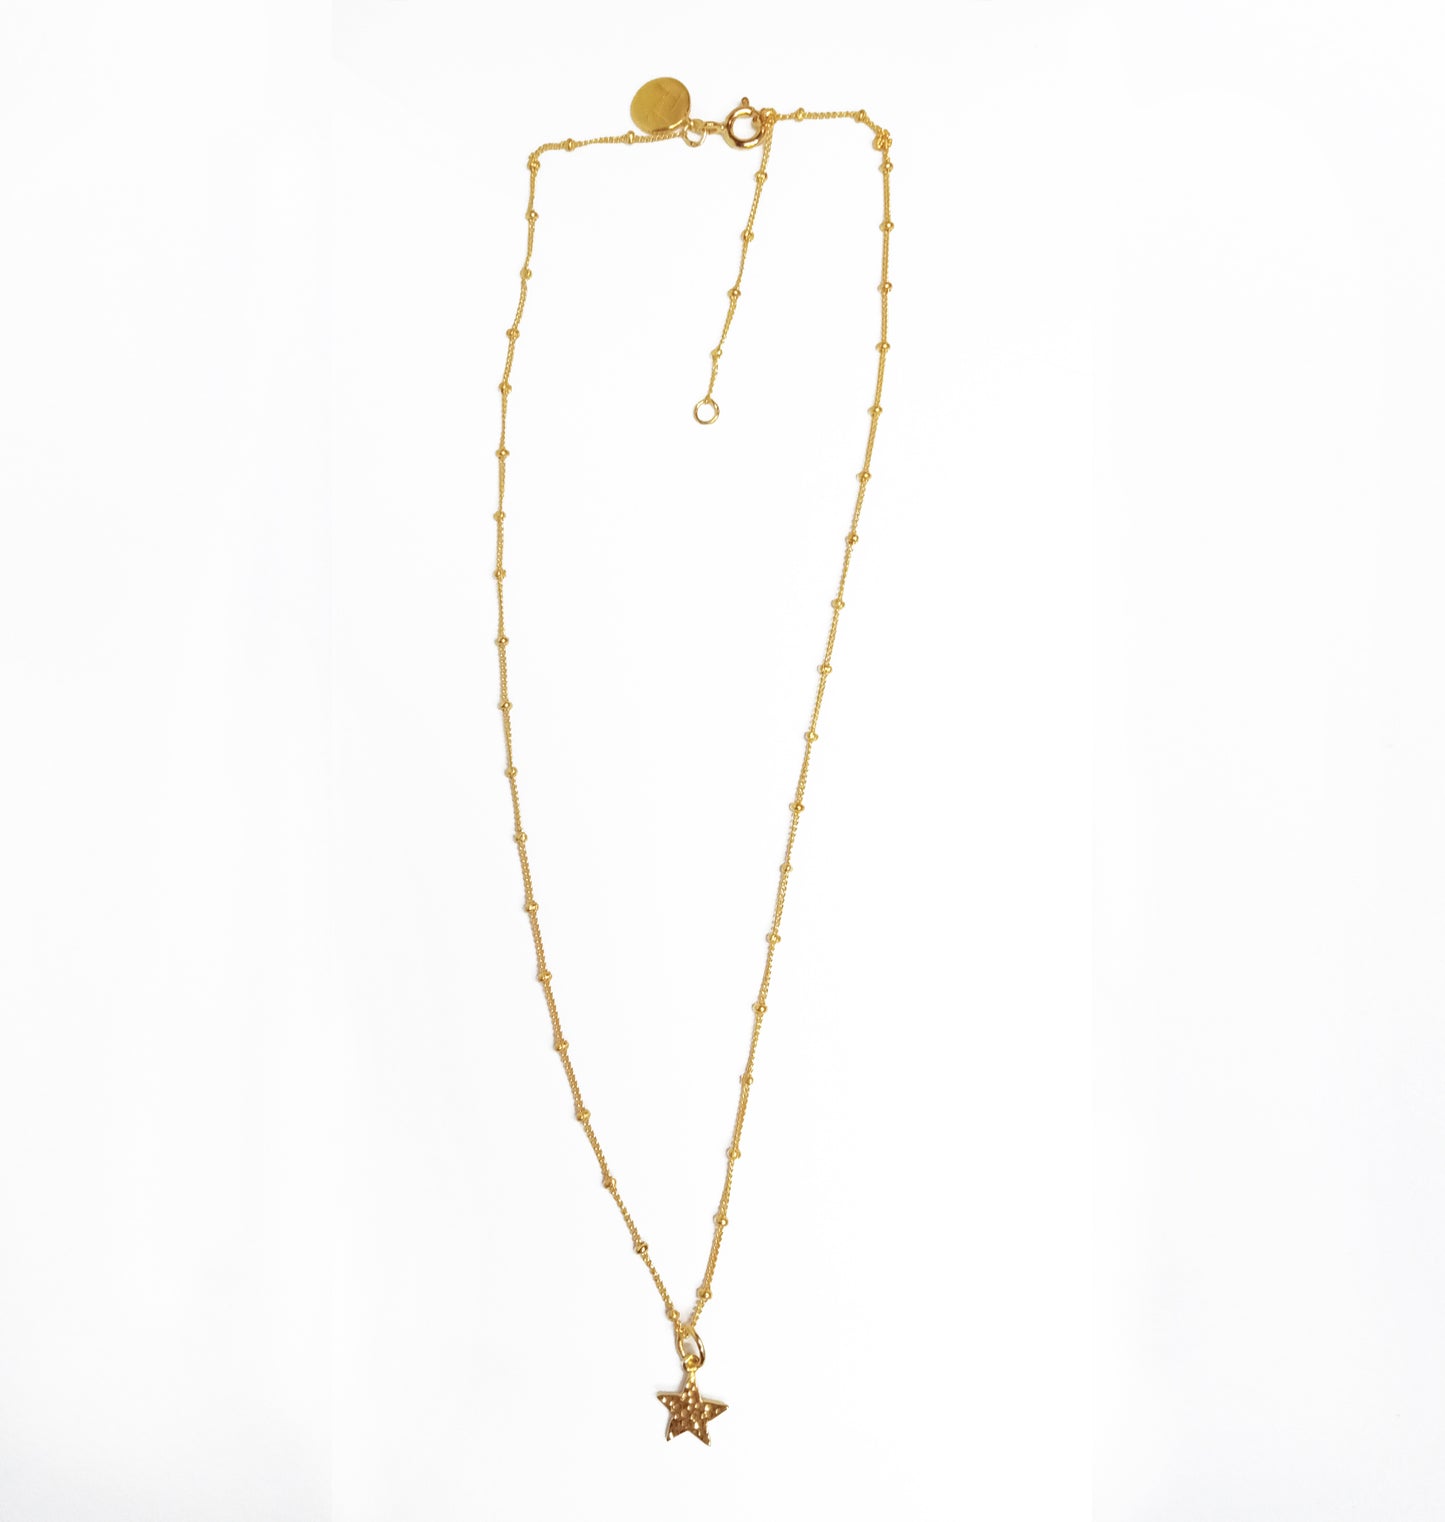 Gold Hammered Star Bobble Chain Necklace